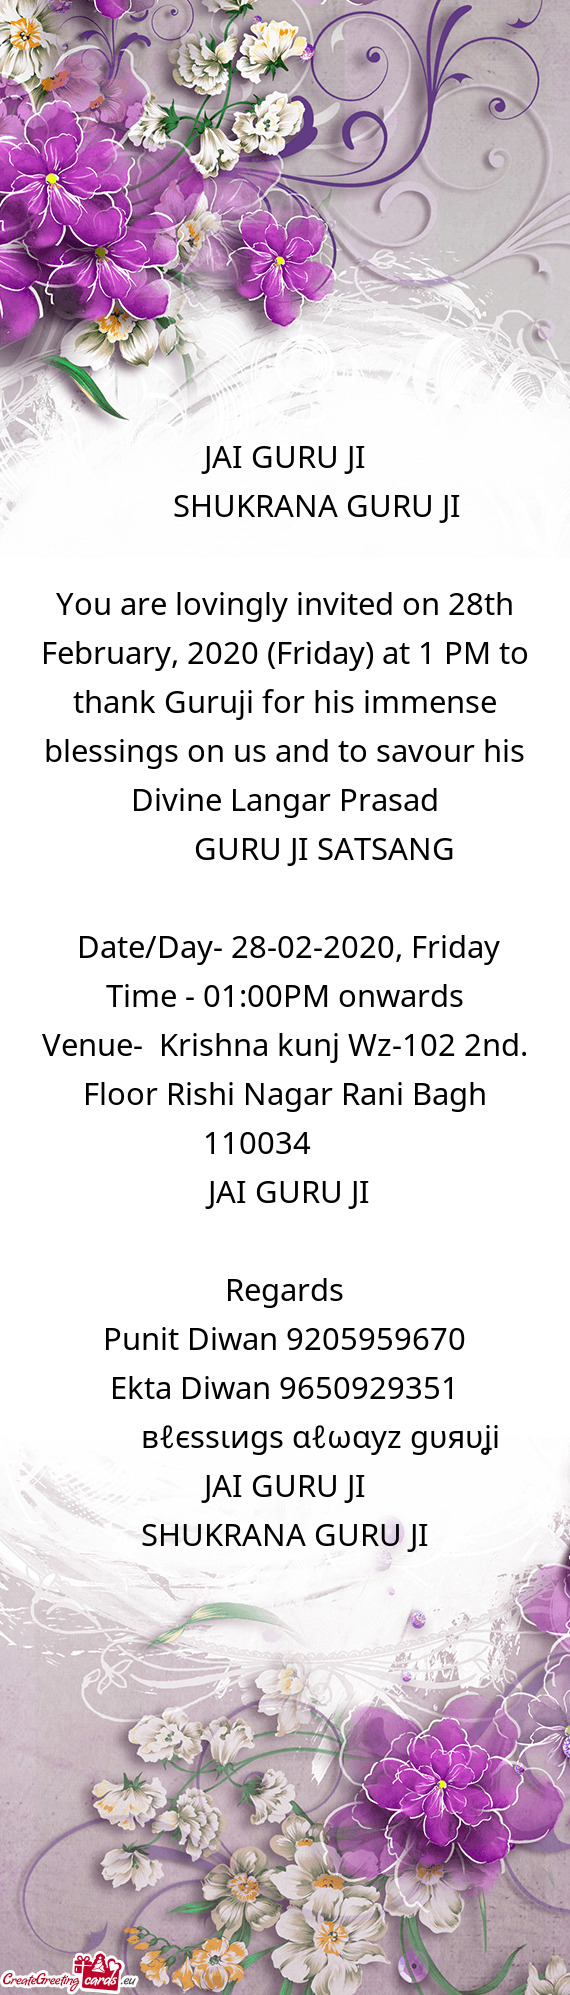 You are lovingly invited on 28th February, 2020 (Friday) at 1 PM to thank Guruji for his immense ble